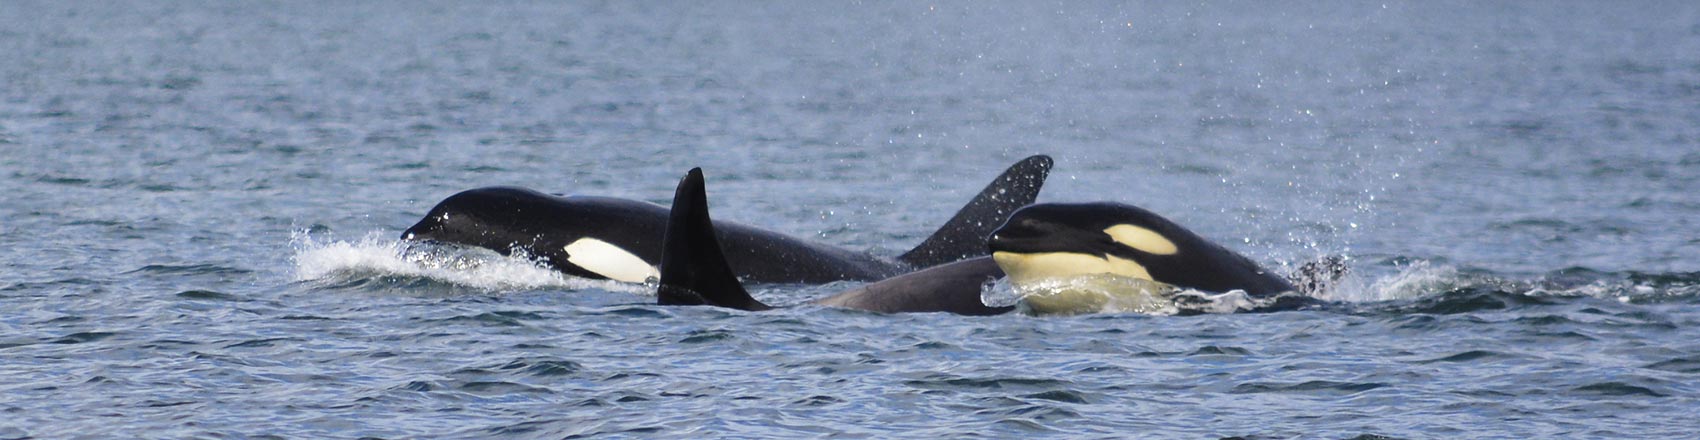 Three orca whales swimming in the waters of Prince William Sound.